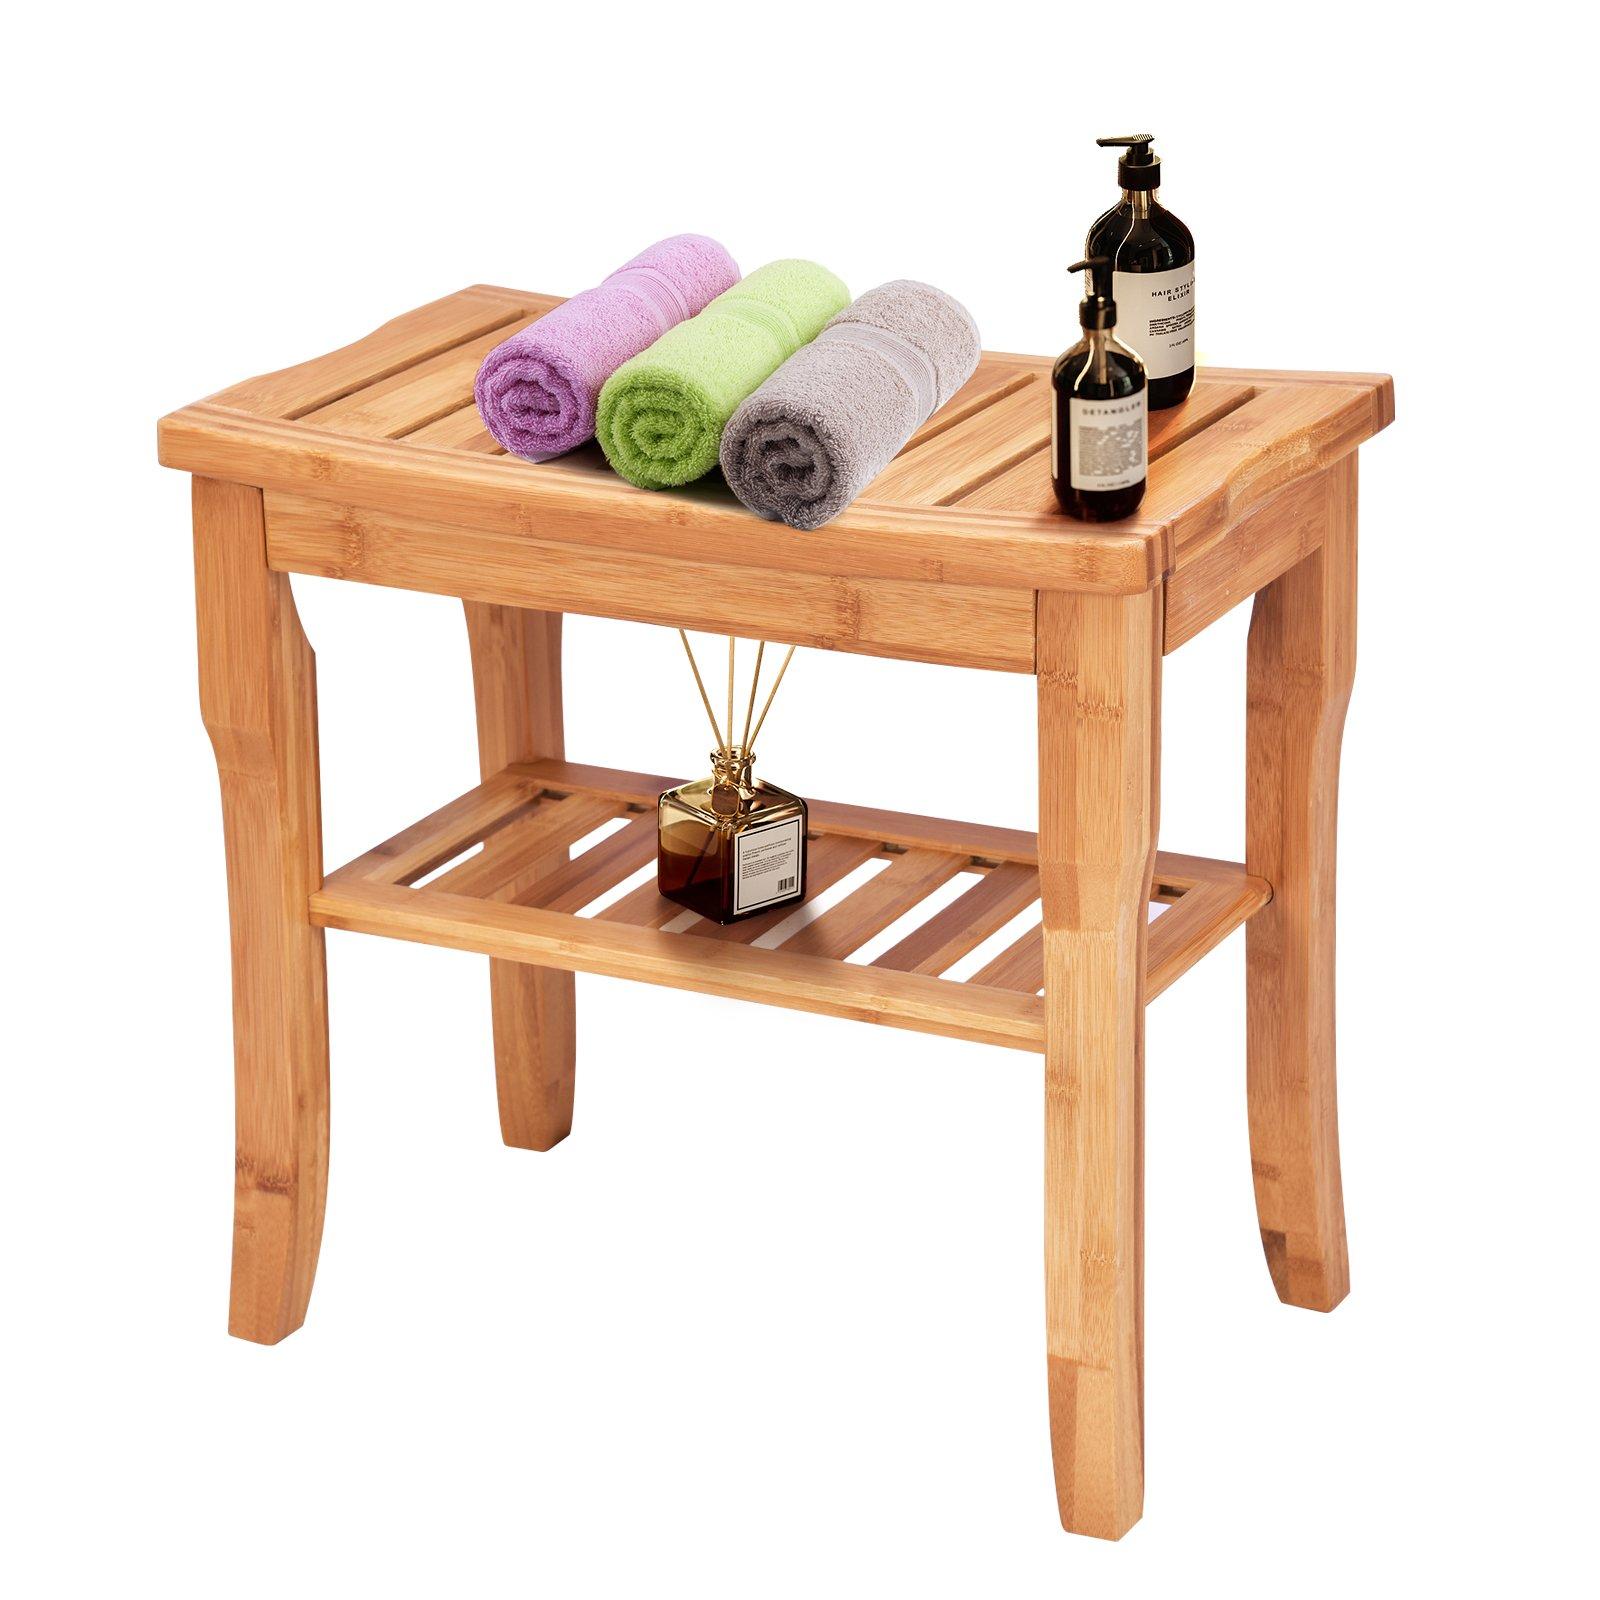 Bamboo Shower Chair Bathroom Shower Bench Seat Spa Chair